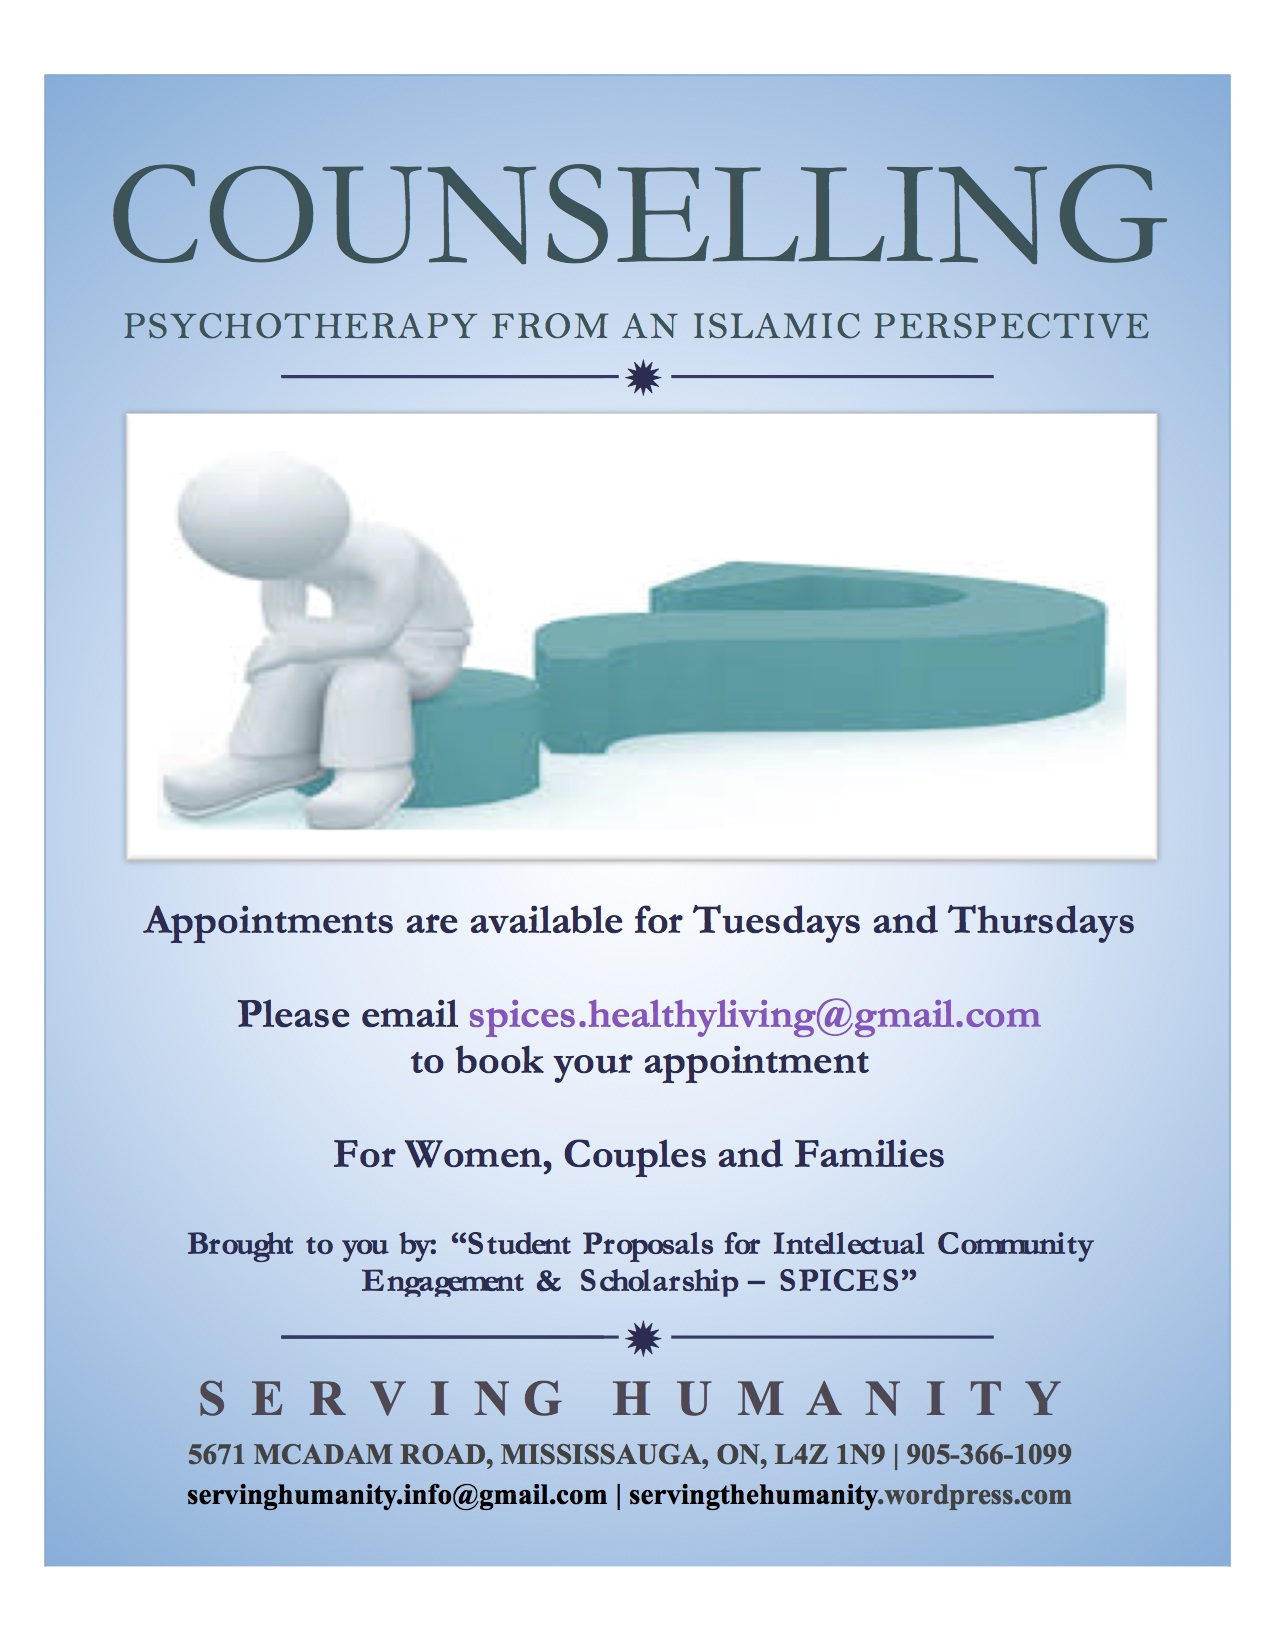 Counselling Flyer